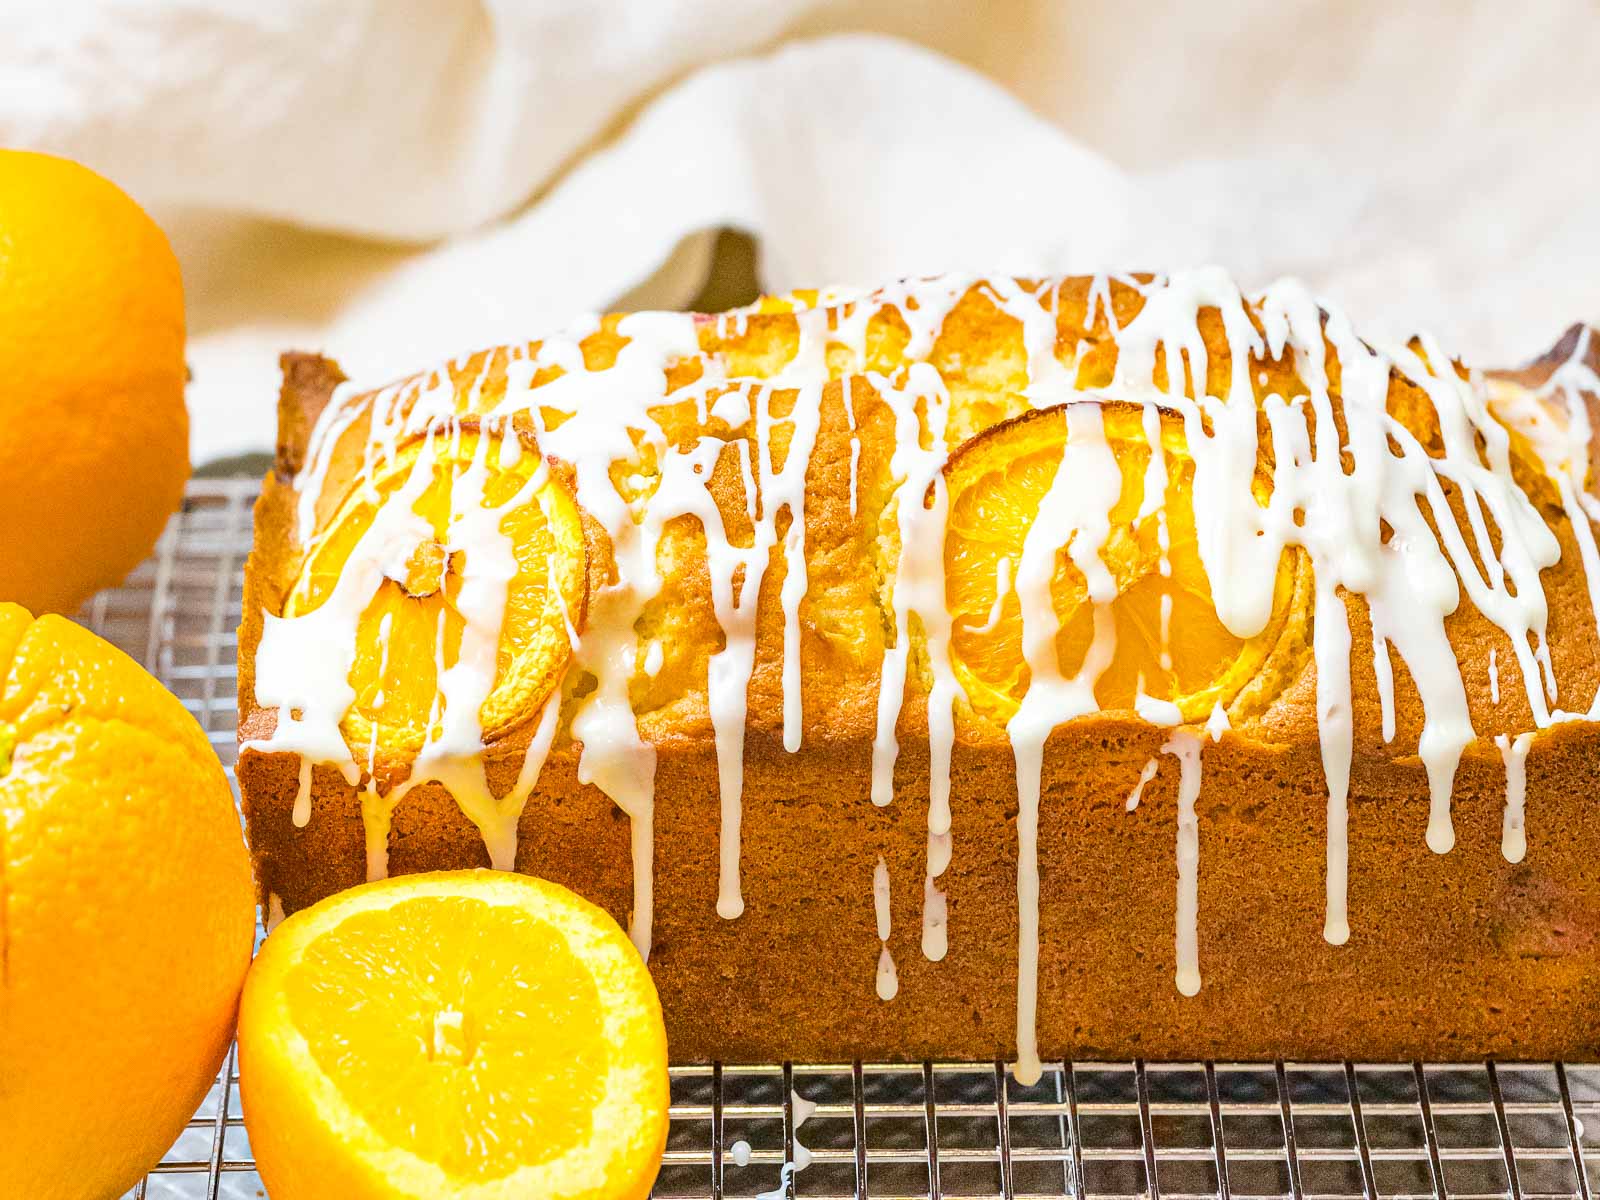 orange pound cake with glaze drizzled on top and falling down the sides next to oranges